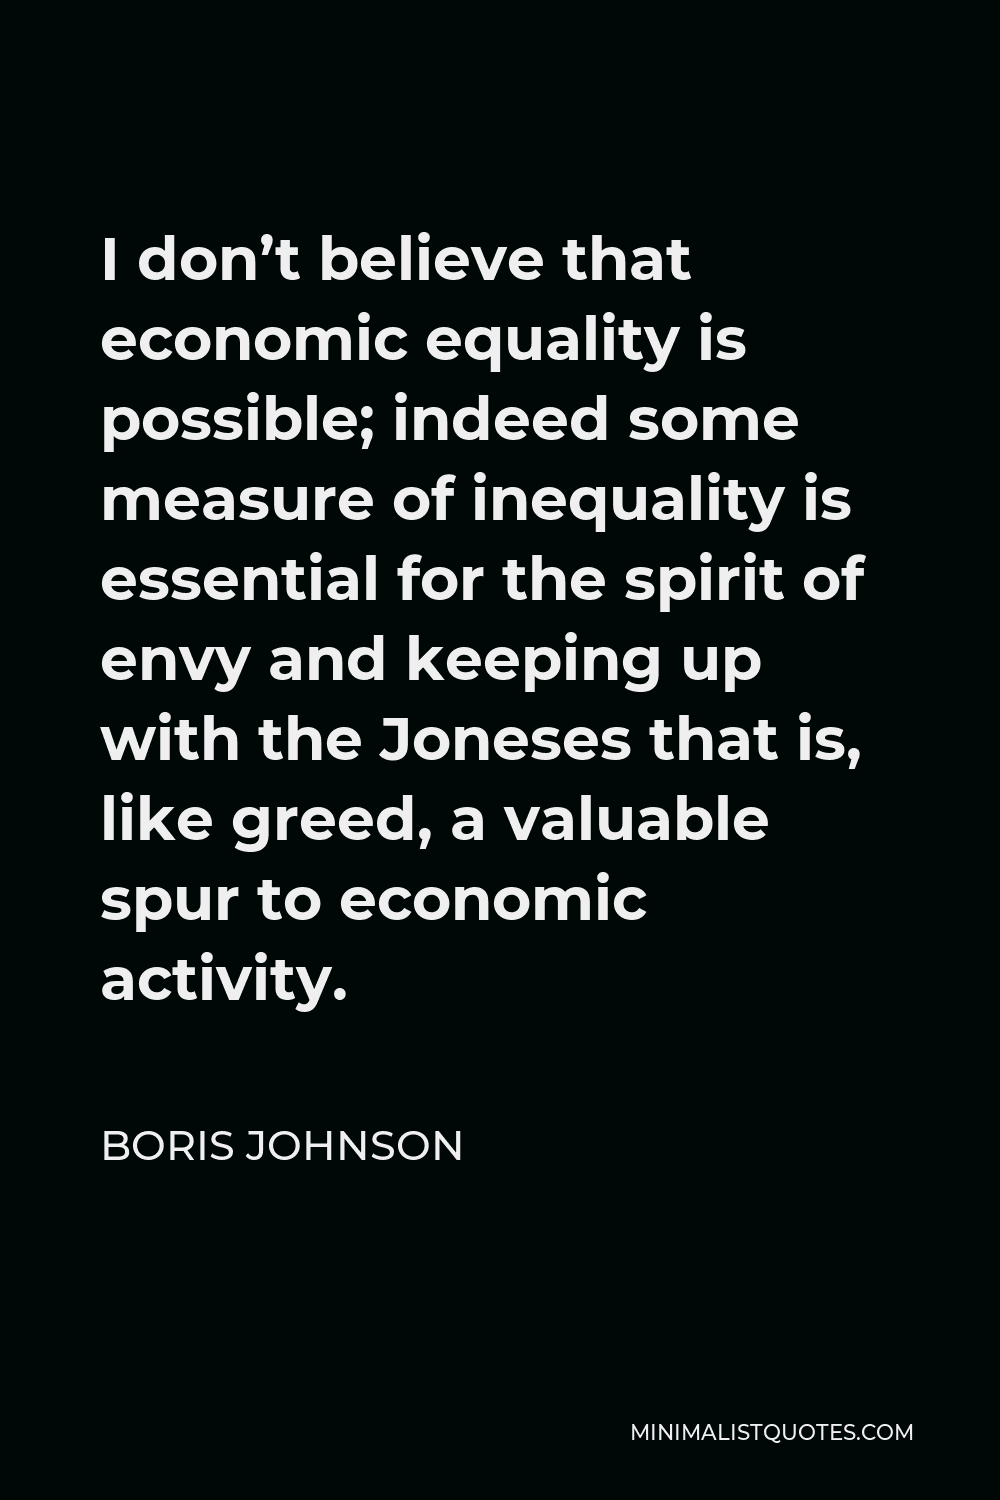 Boris Johnson Quote - I don’t believe that economic equality is possible; indeed some measure of inequality is essential for the spirit of envy and keeping up with the Joneses that is, like greed, a valuable spur to economic activity.